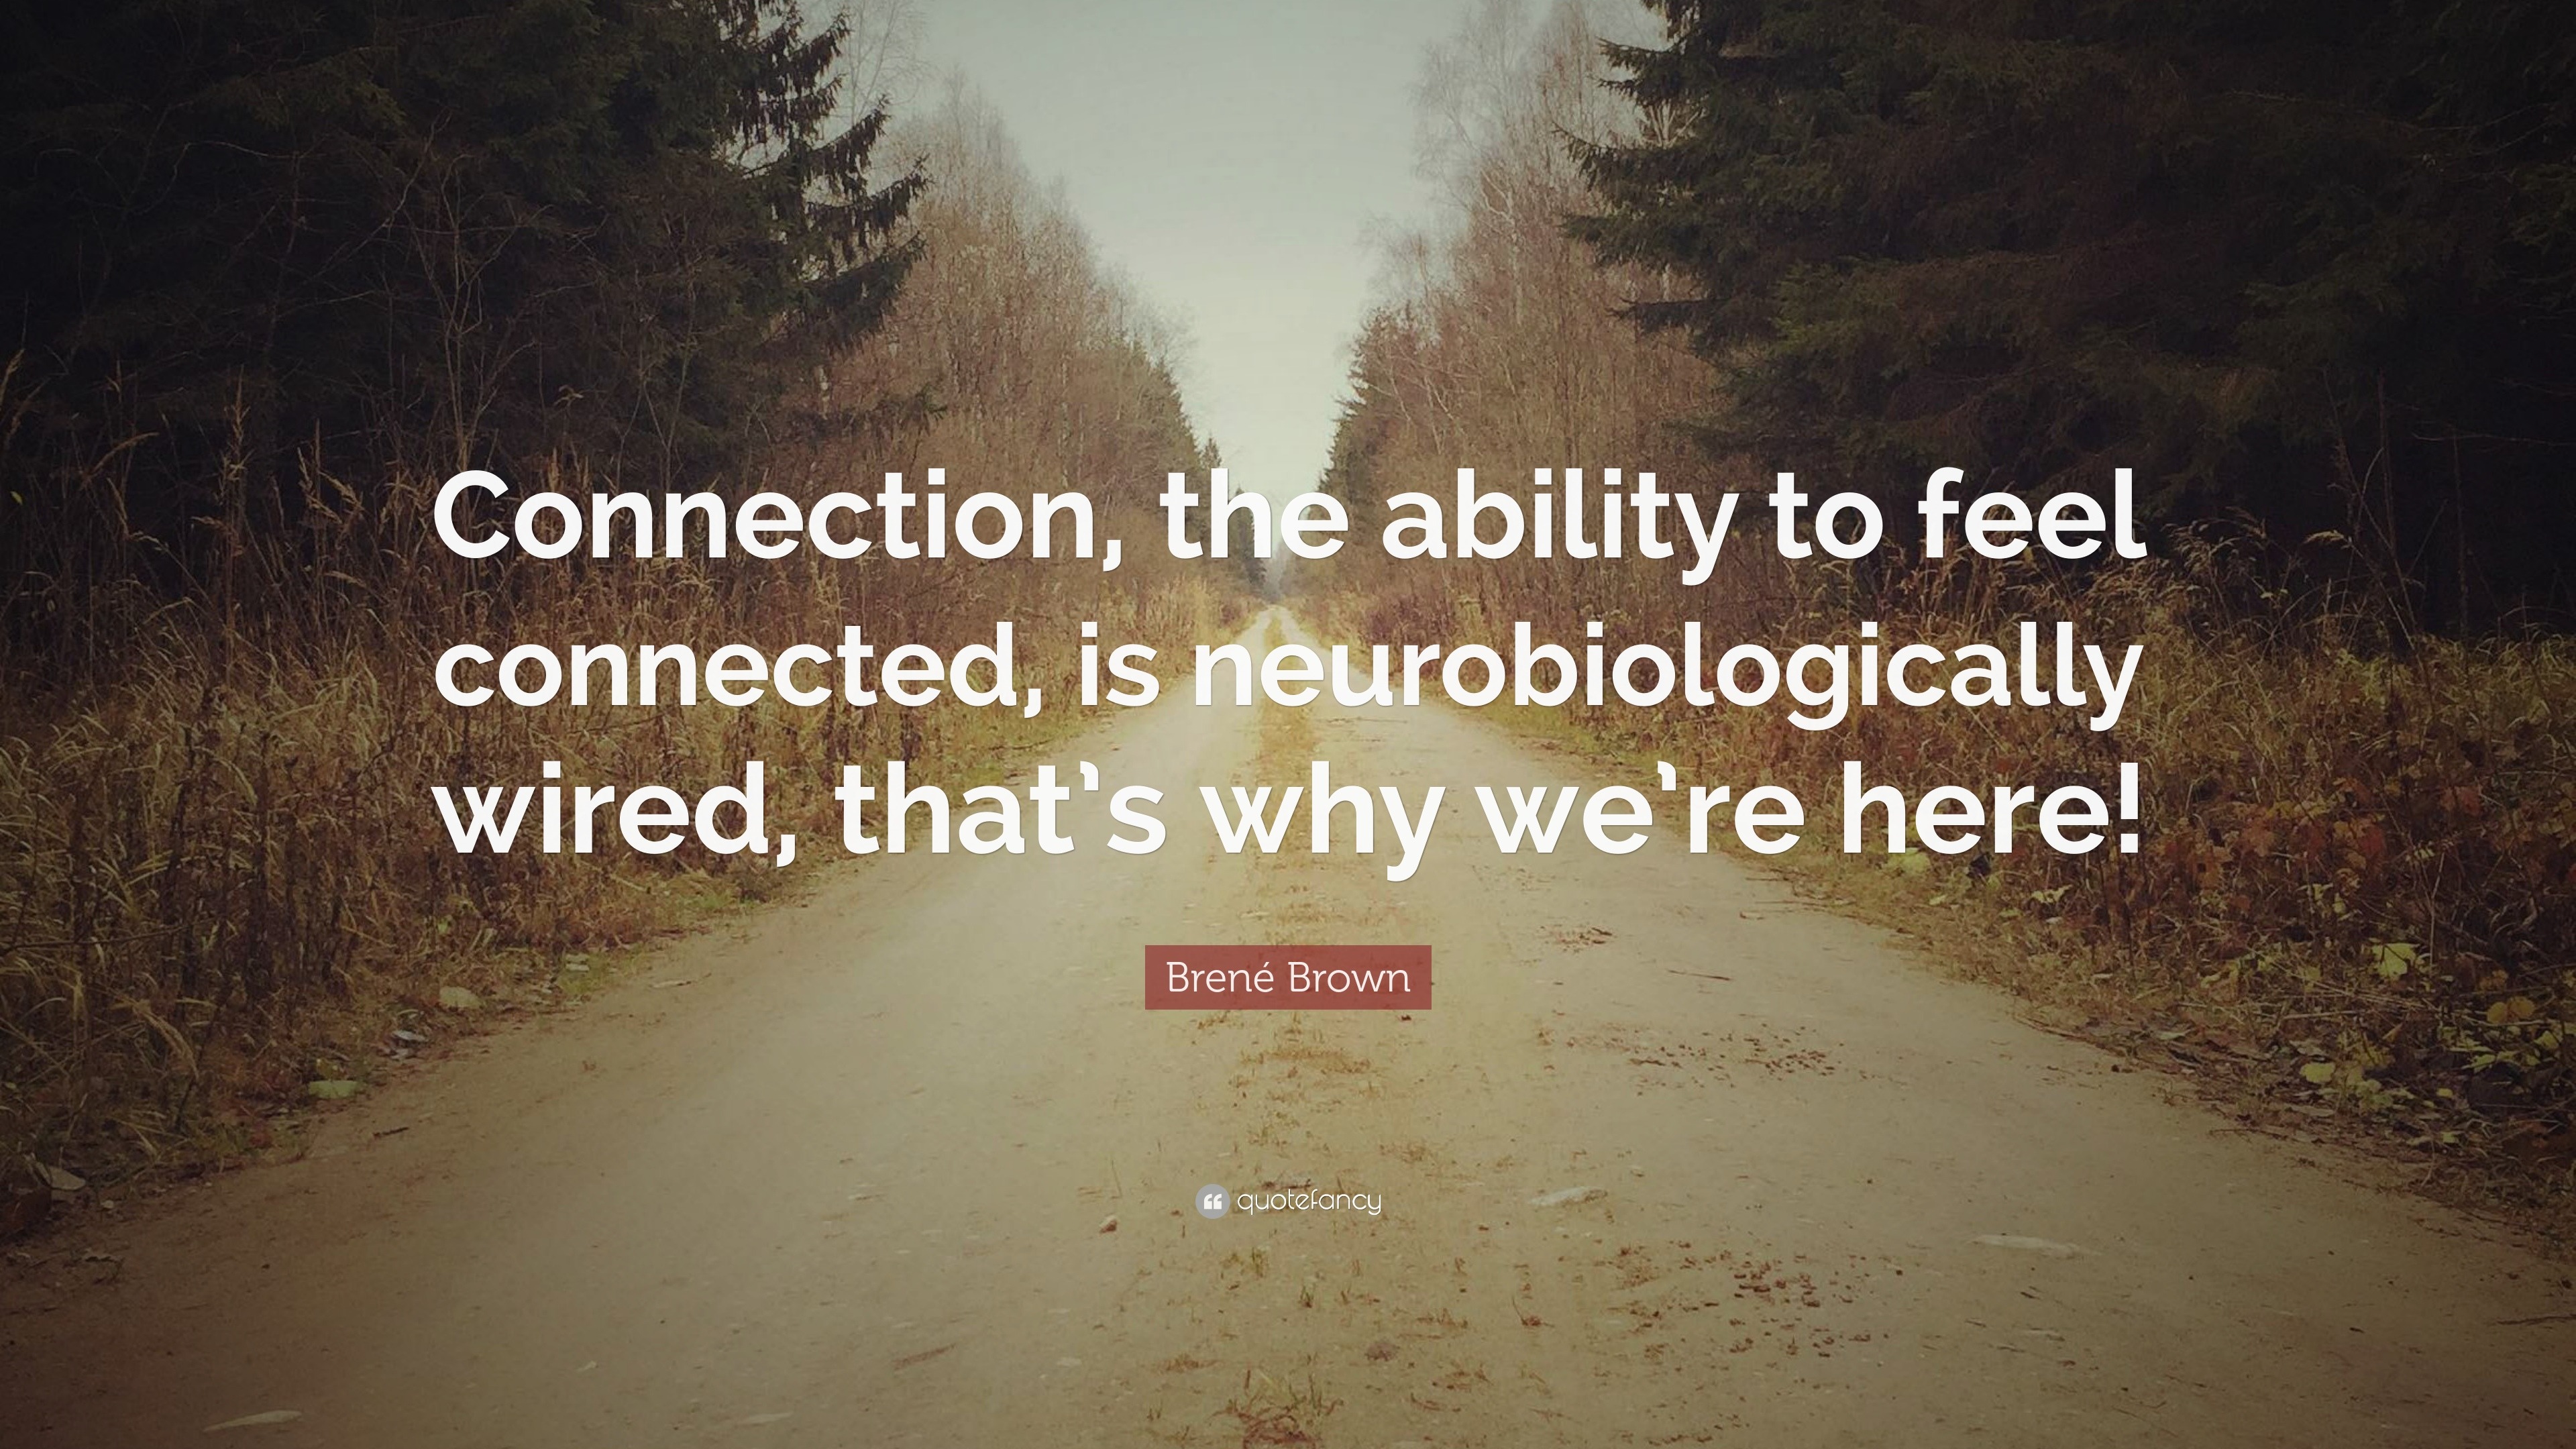 Brené Brown Quote: "Connection, the ability to feel connected, is neurobiologically wired, that ...